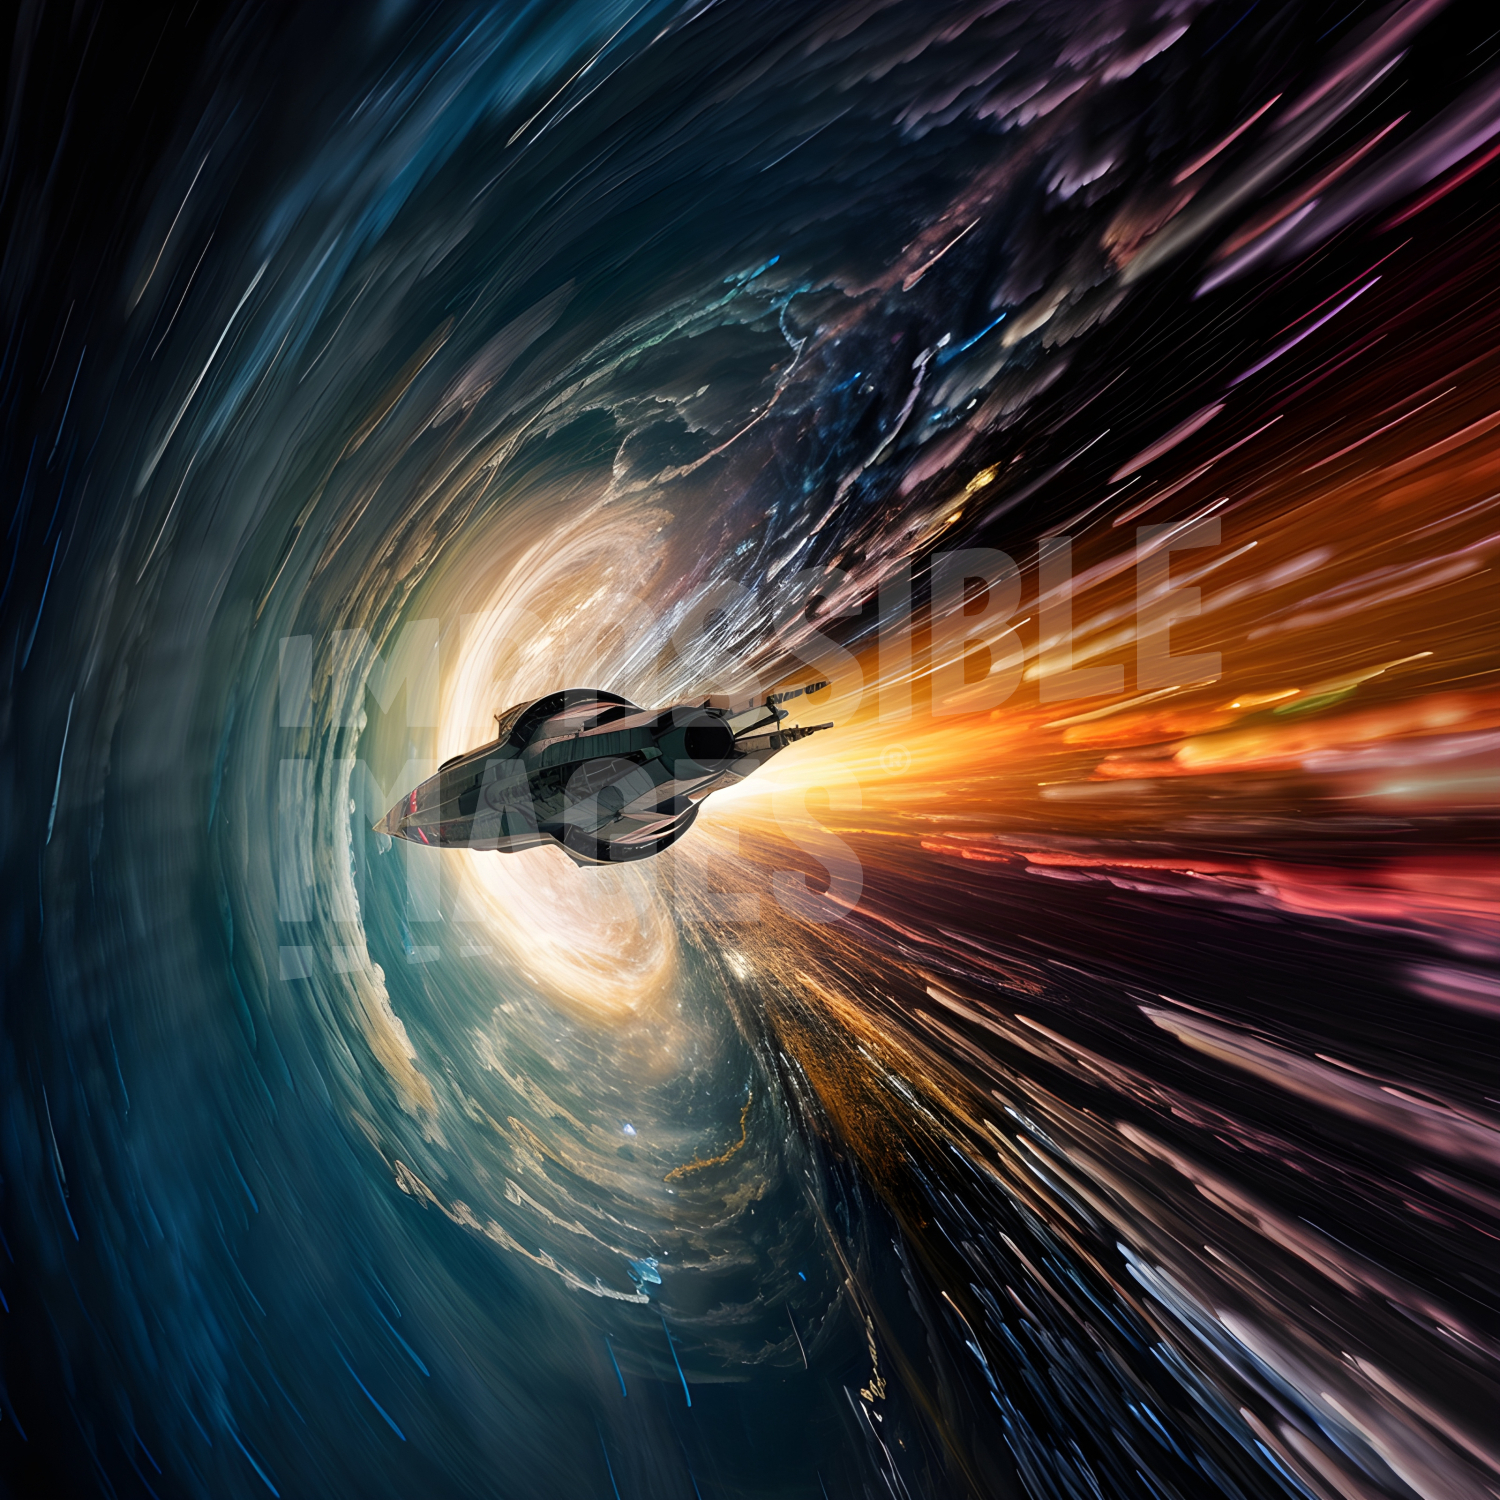 A space ship traveling through a vortex of light